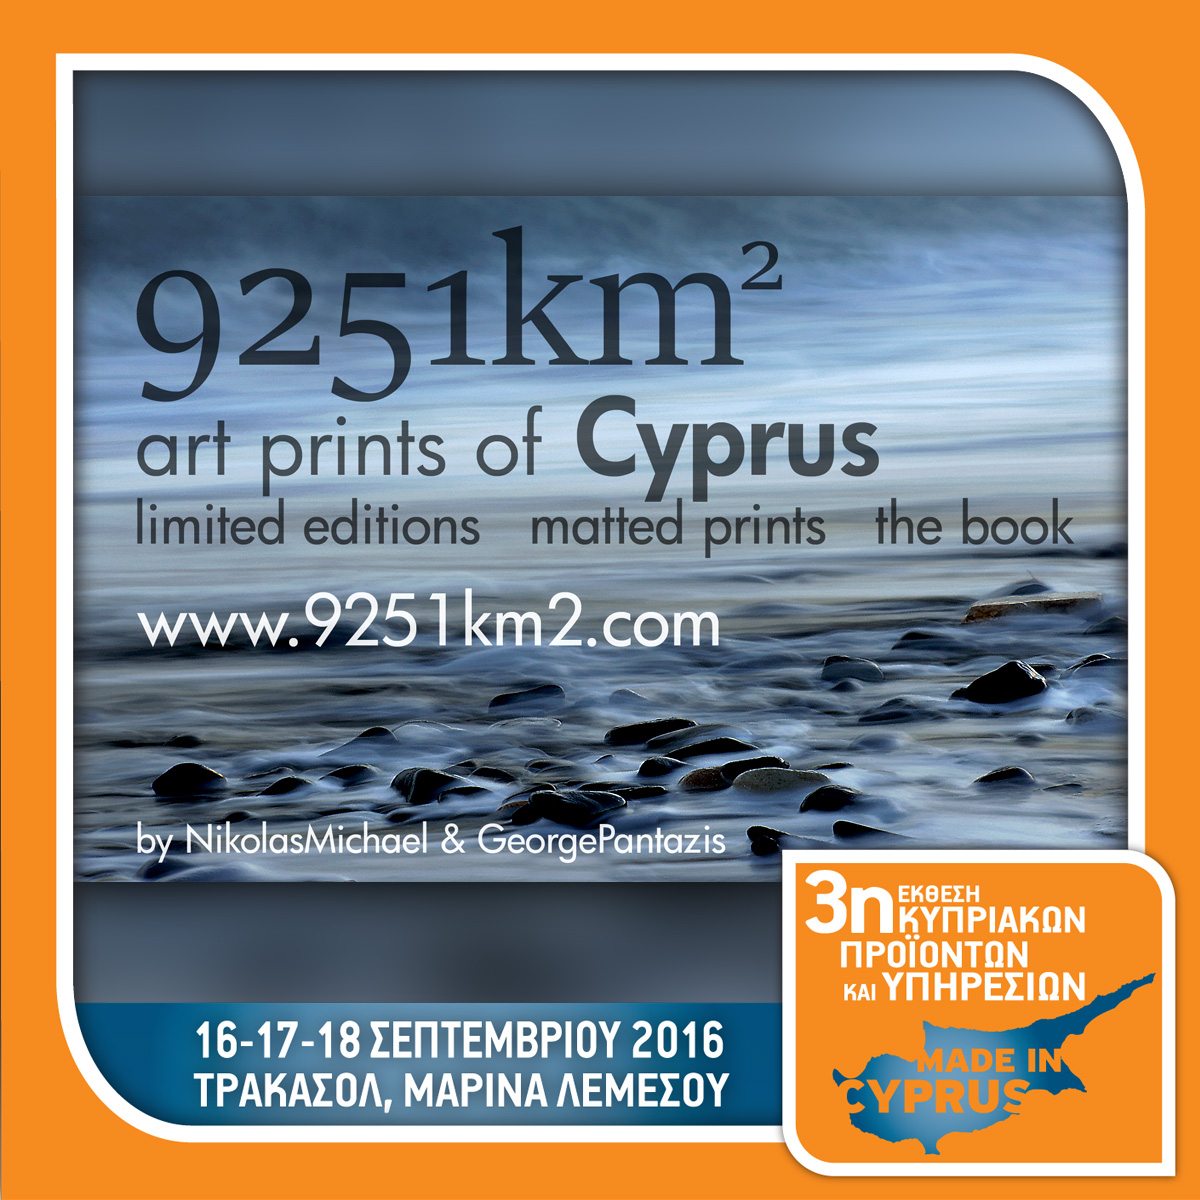 9251km2 Α photographic journey through the whole surface area of Cyprus - Stand No 35